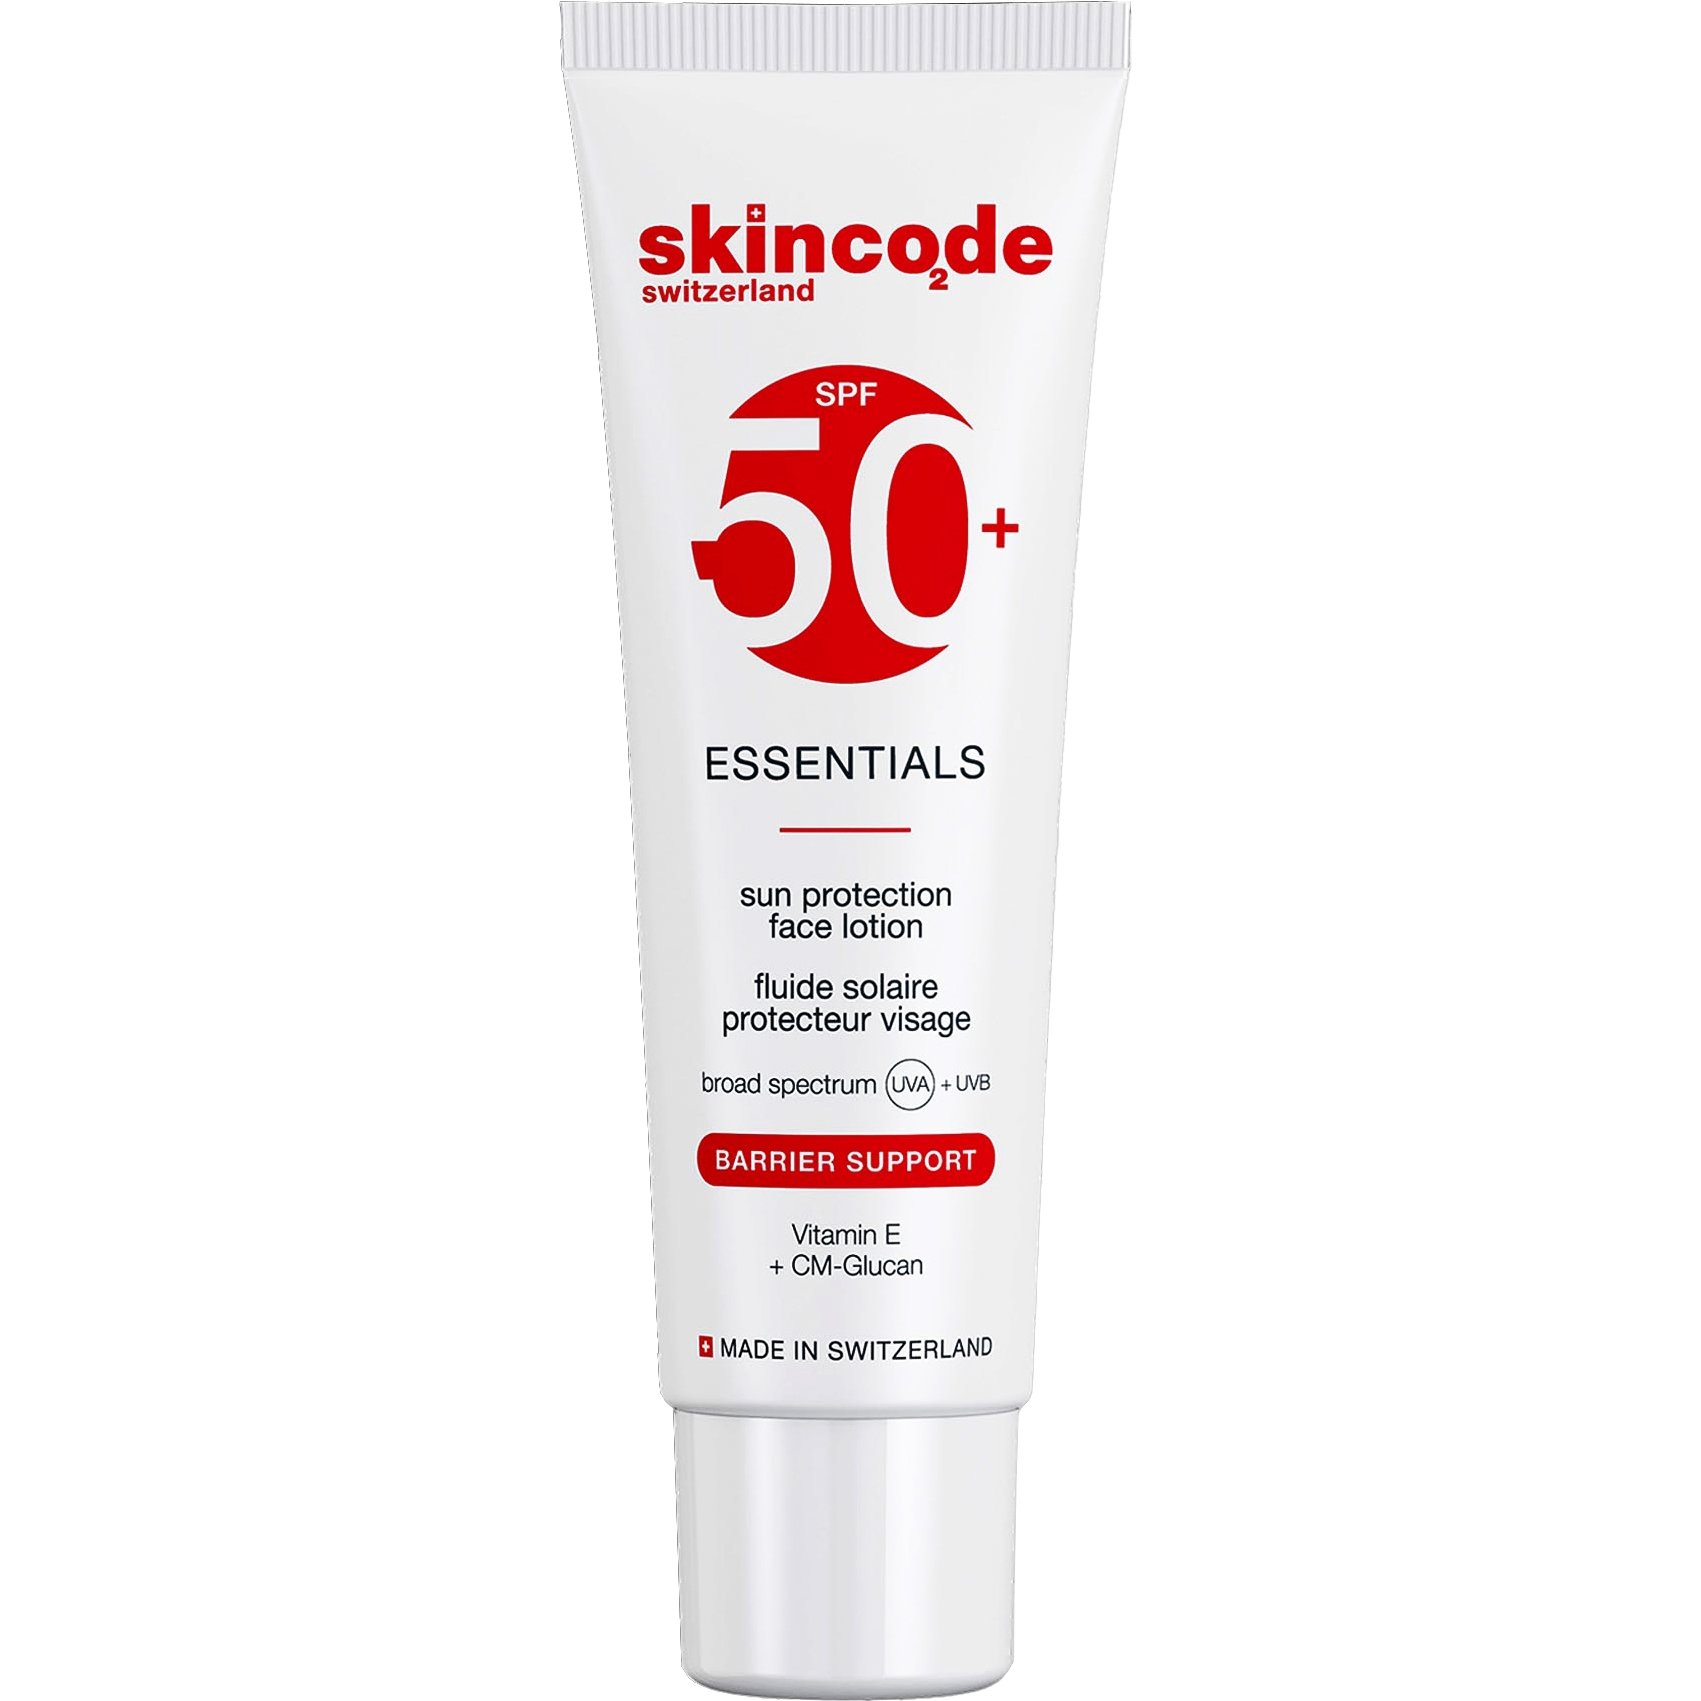 Skincode Skincode Essentials Sun Protection Face Lotion Spf50+ with Vitamin E & CM-Glucan Λεπτόρρευστη Αντηλιακή Κρέμα Προσώπου Πολύ Υψηλής Προστασίας 50ml